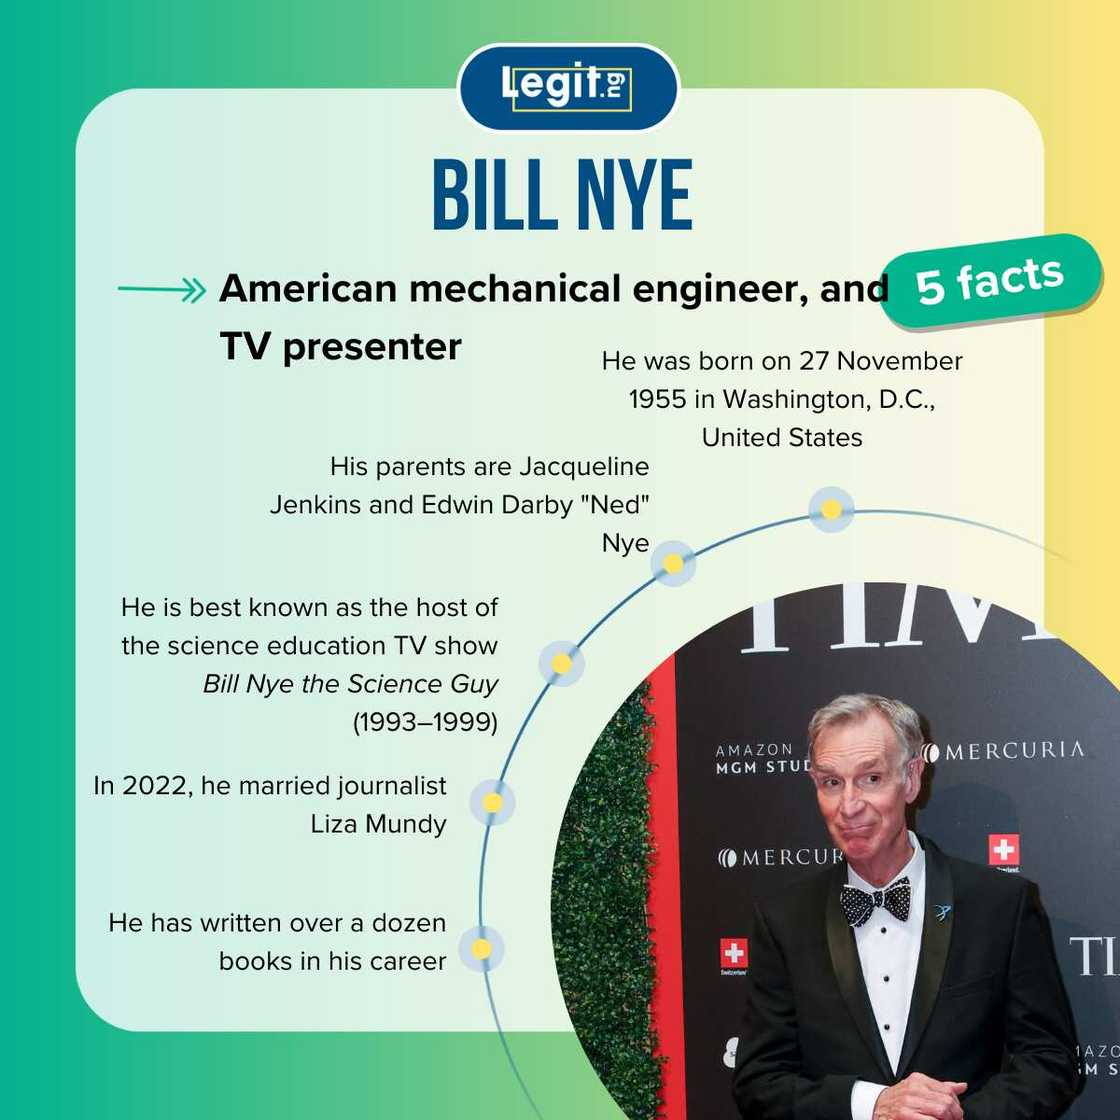 Facts about Bill Nye